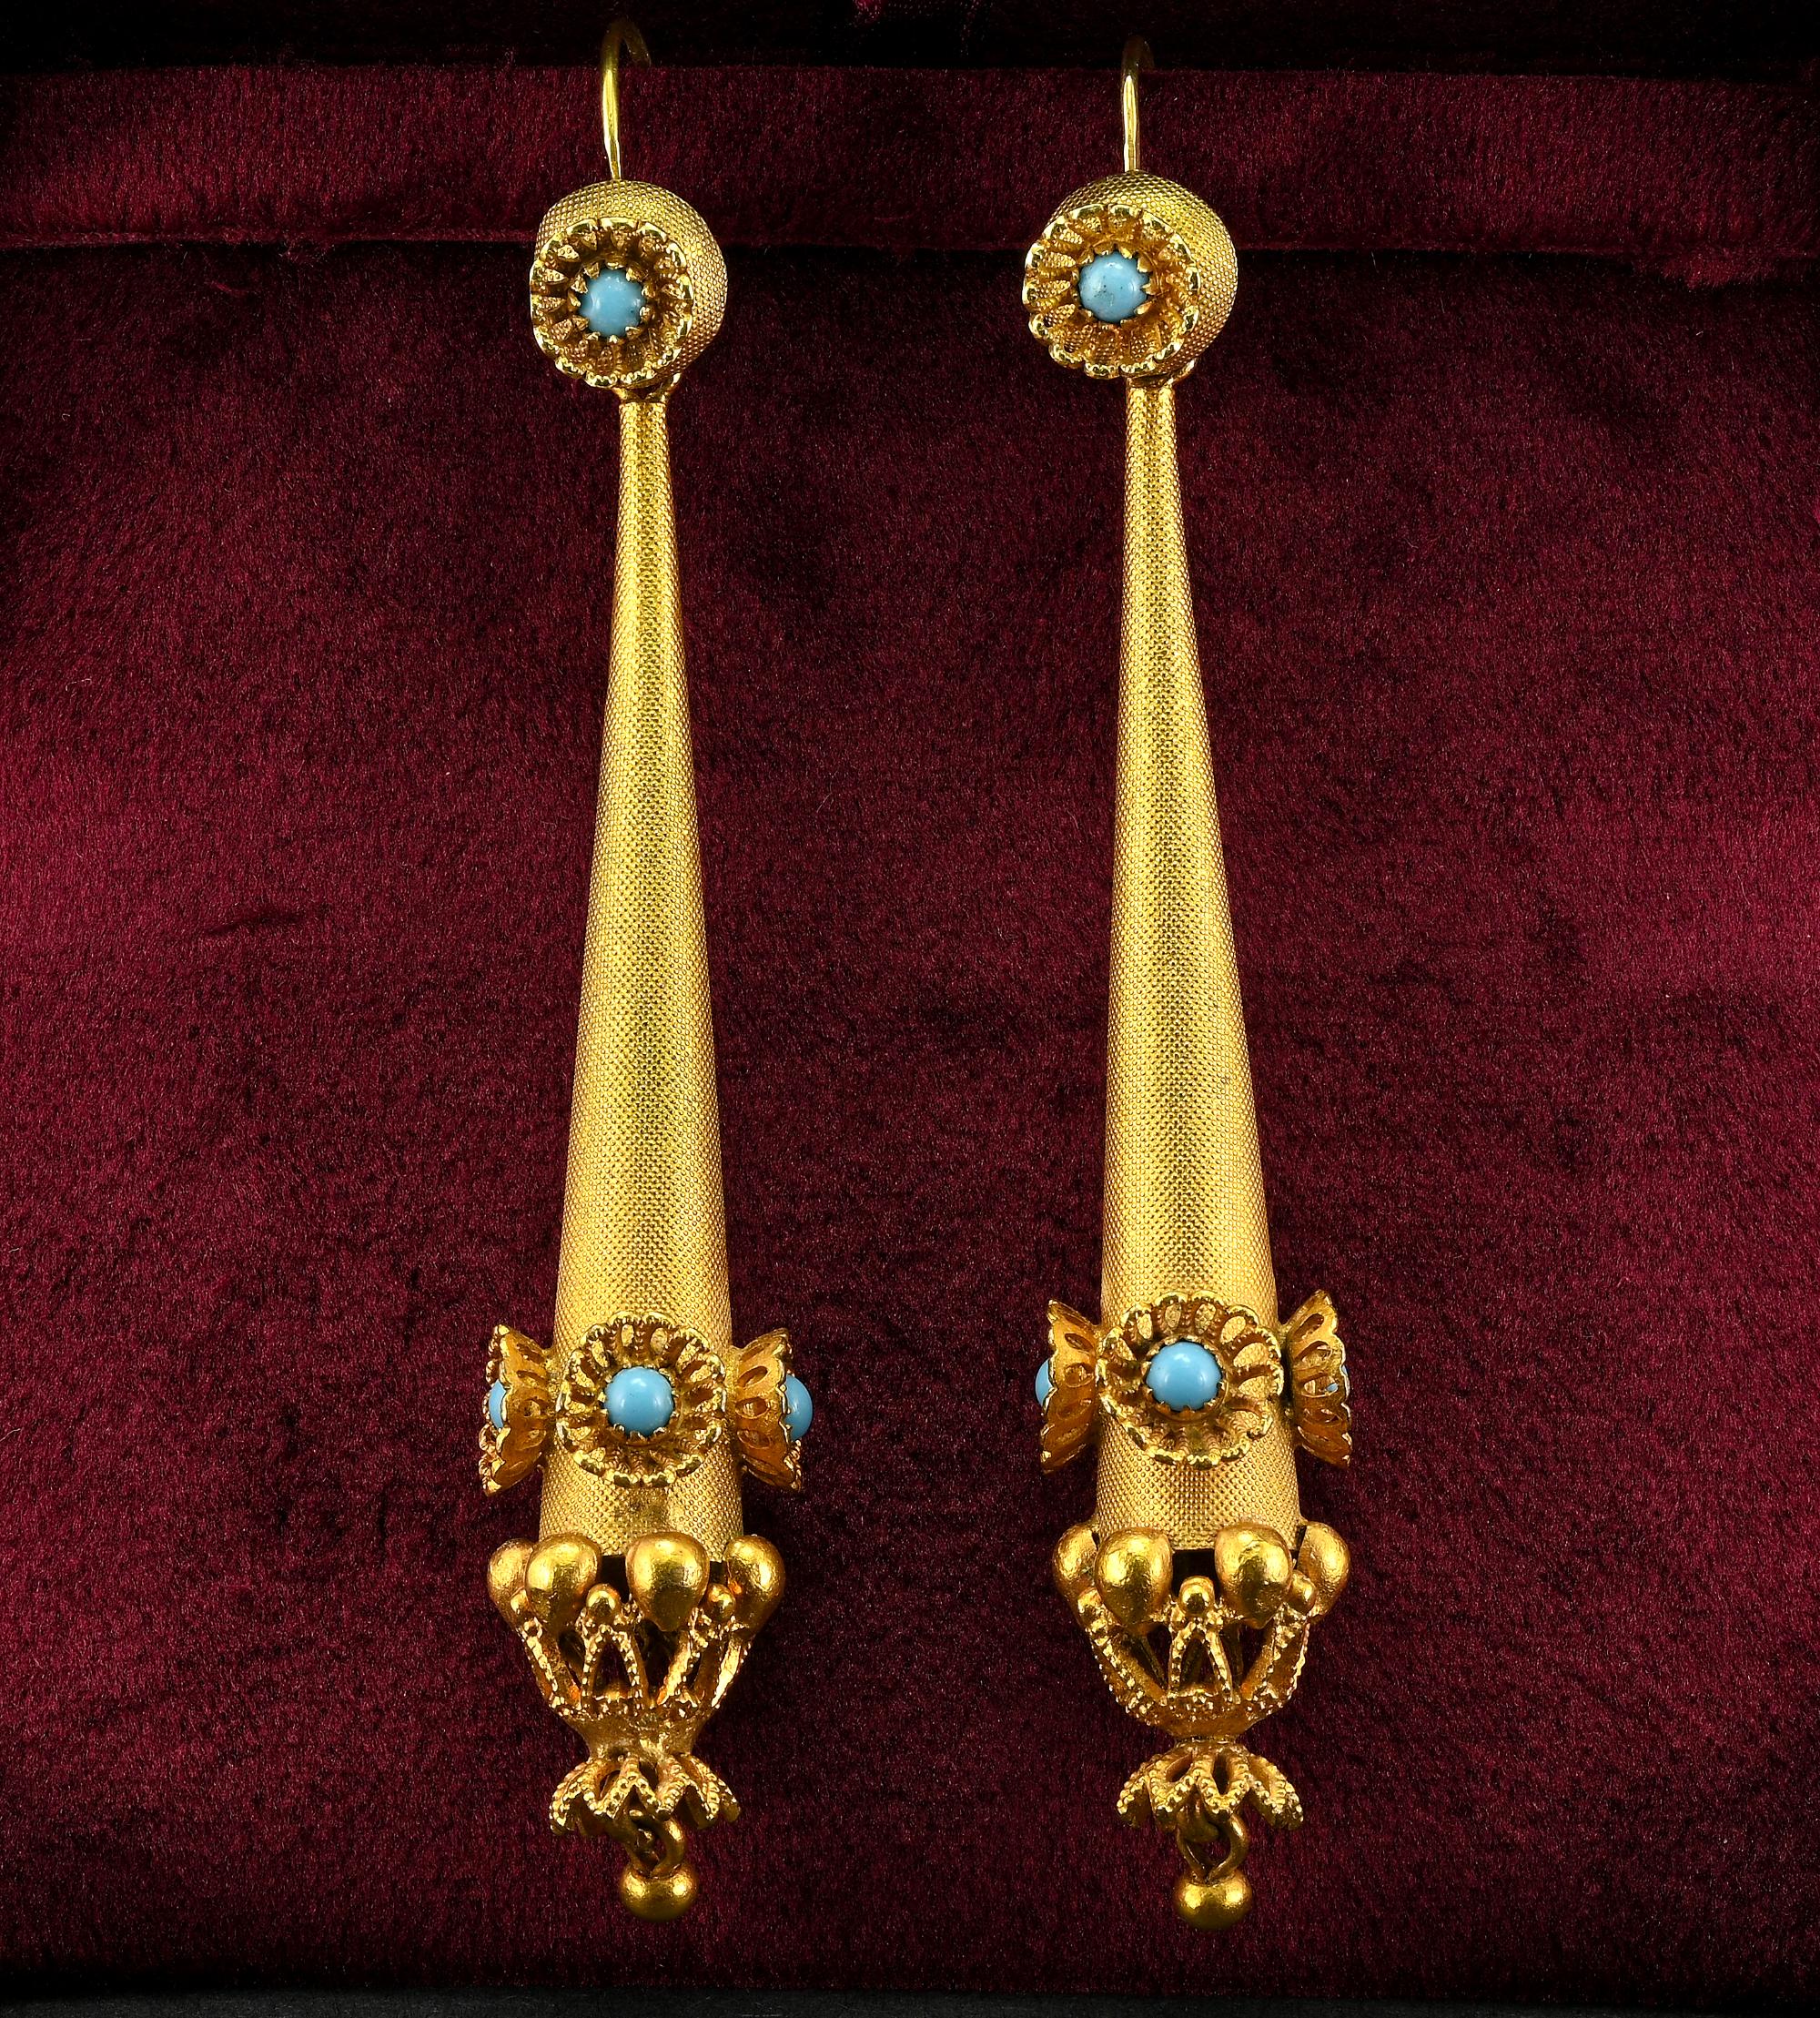 Fascinating pair of long torpedo earrings, Georgian period 1790 circa, solid 10 KT gold
English origin
Marvelous antique workmanship made with granulation texture throughout and pierced Turquoise set flowers Etruscan inspired work at the bottom
Tops